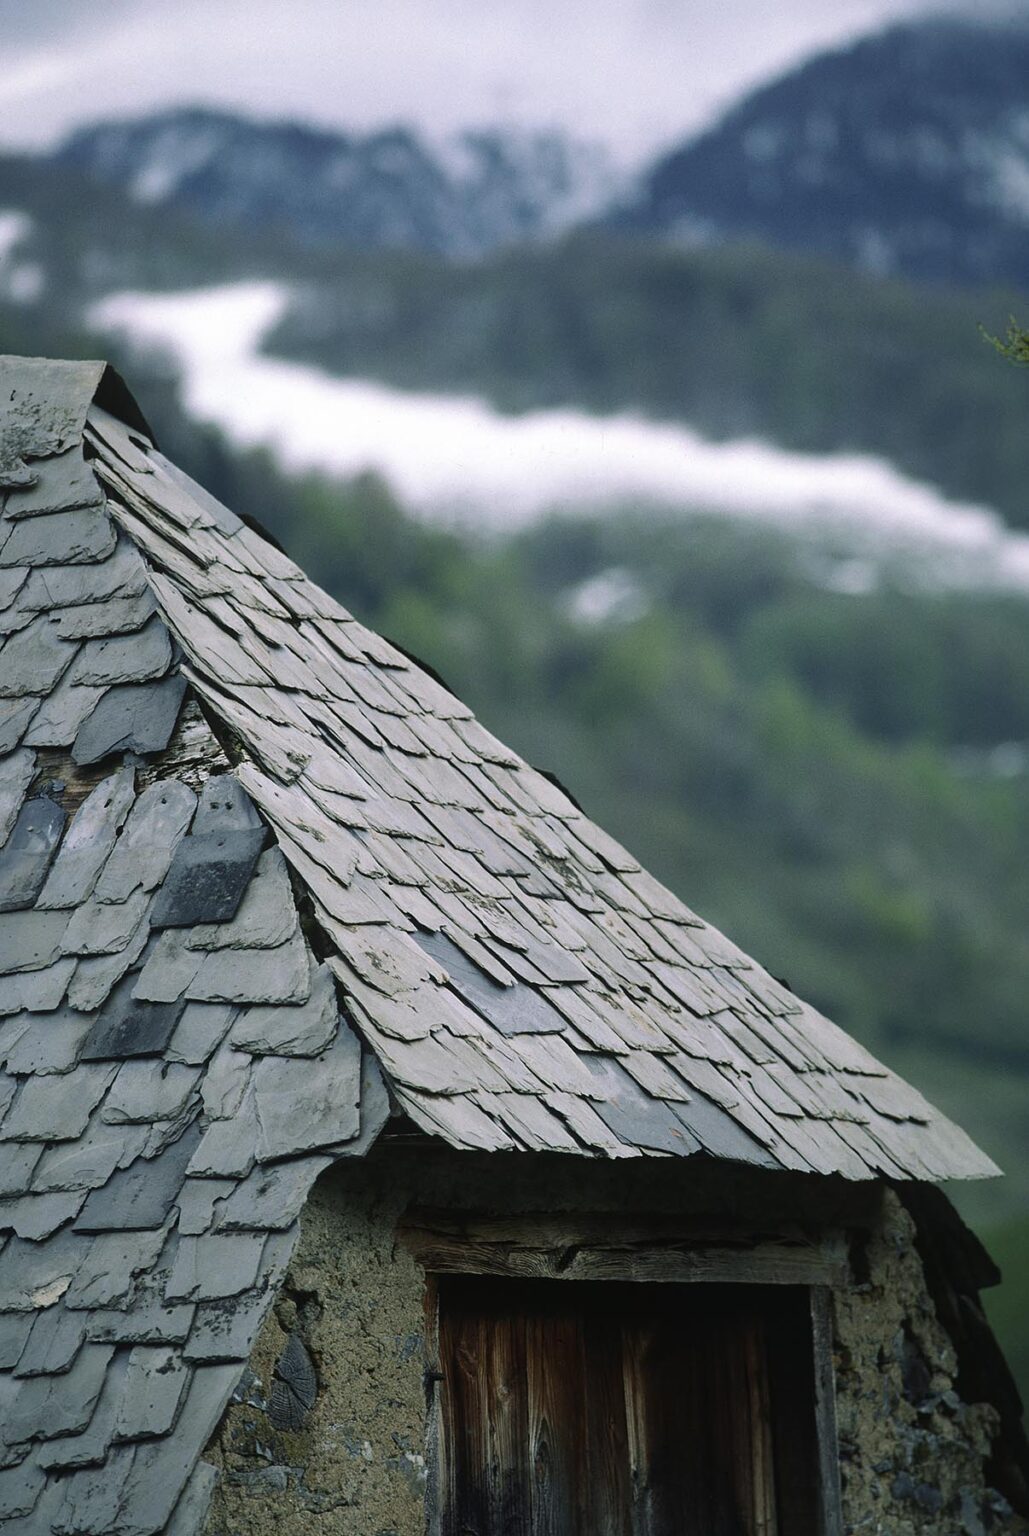 DETAIL of STONE SHINGLED ROOF and FARM HOUSE - PYRENEES MOUNTAINS, FRANCE